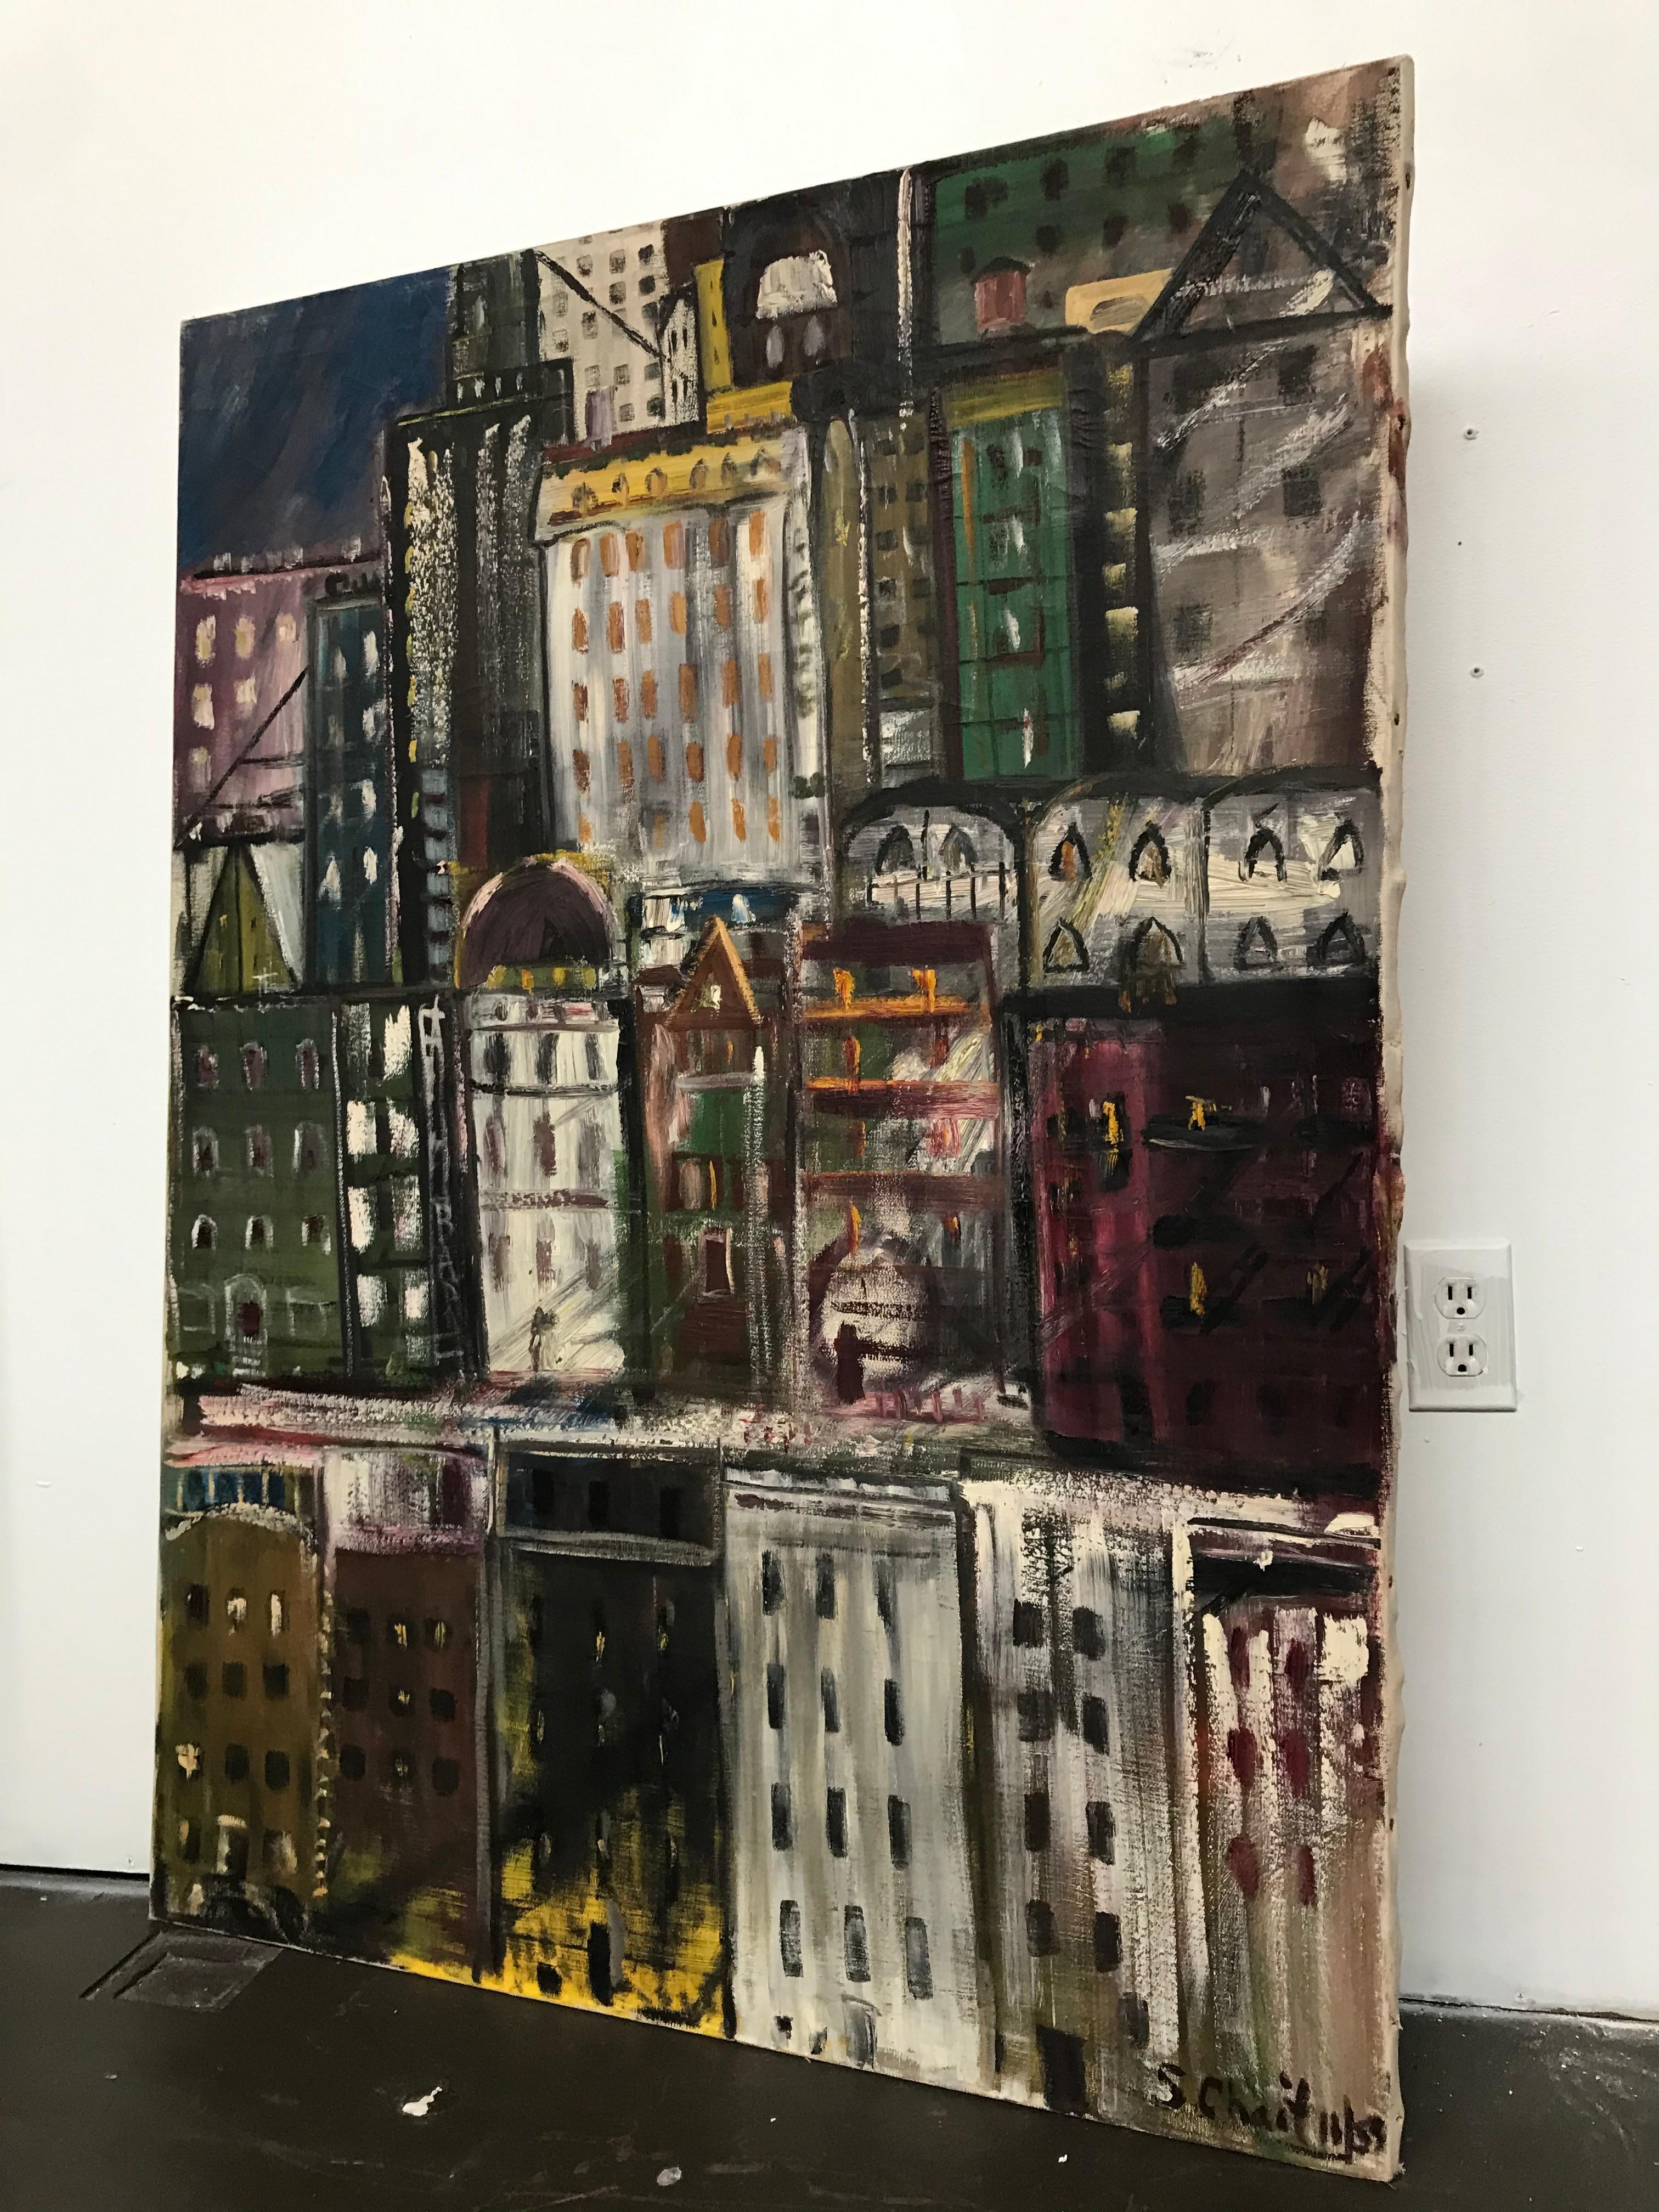 Mid Century Modern Large Scale Painting by Sonia Chaitin New York City 1959 12